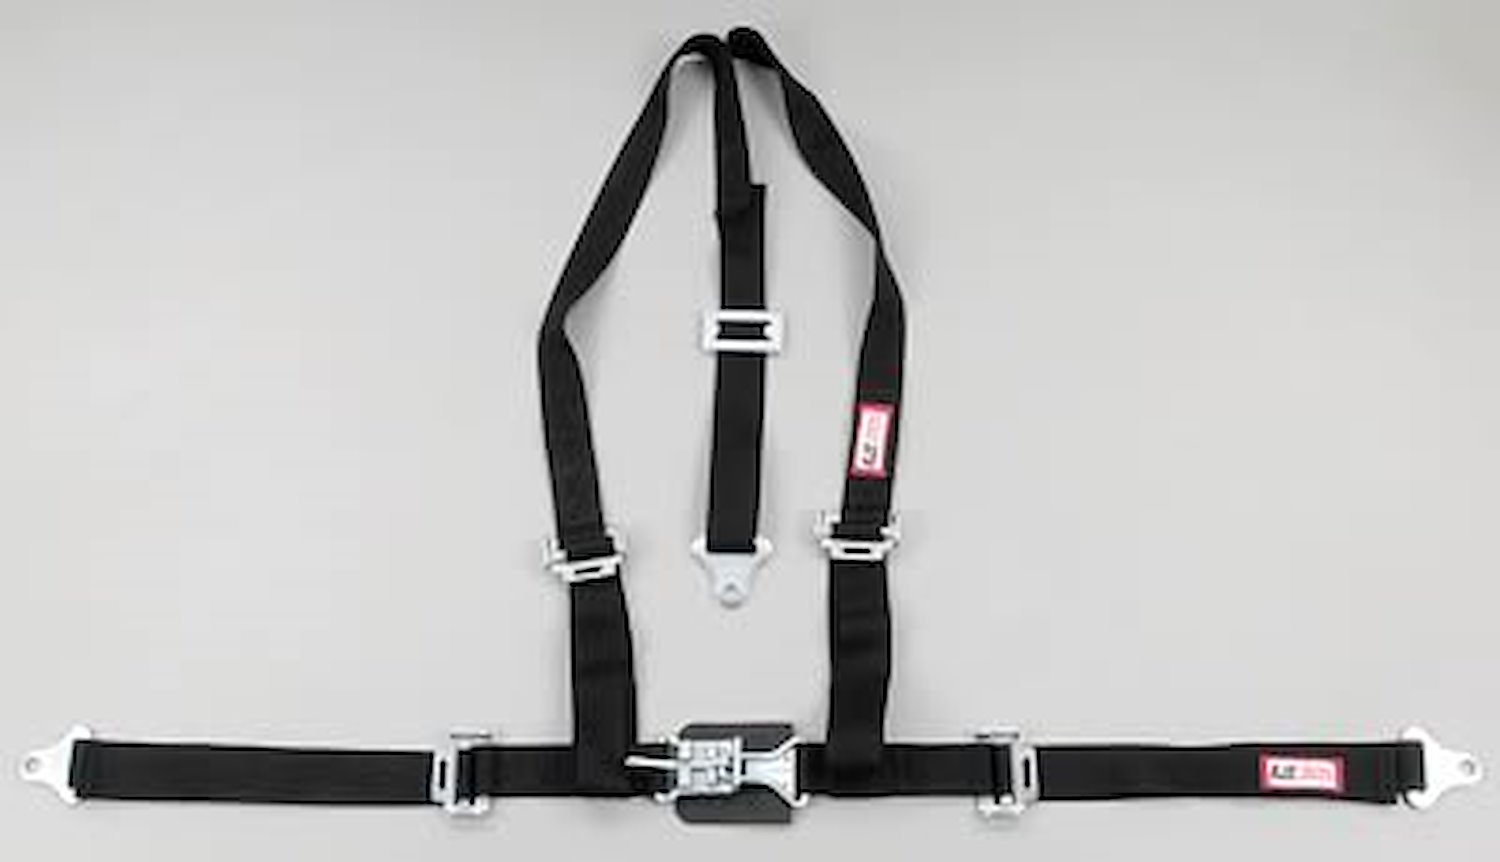 NON-SFI L&L HARNESS 3 PULL UP Lap Belt SNAP SEWN IN 2 S.H. Individual FLOOR Mount WRAP/SNAP ORANGE